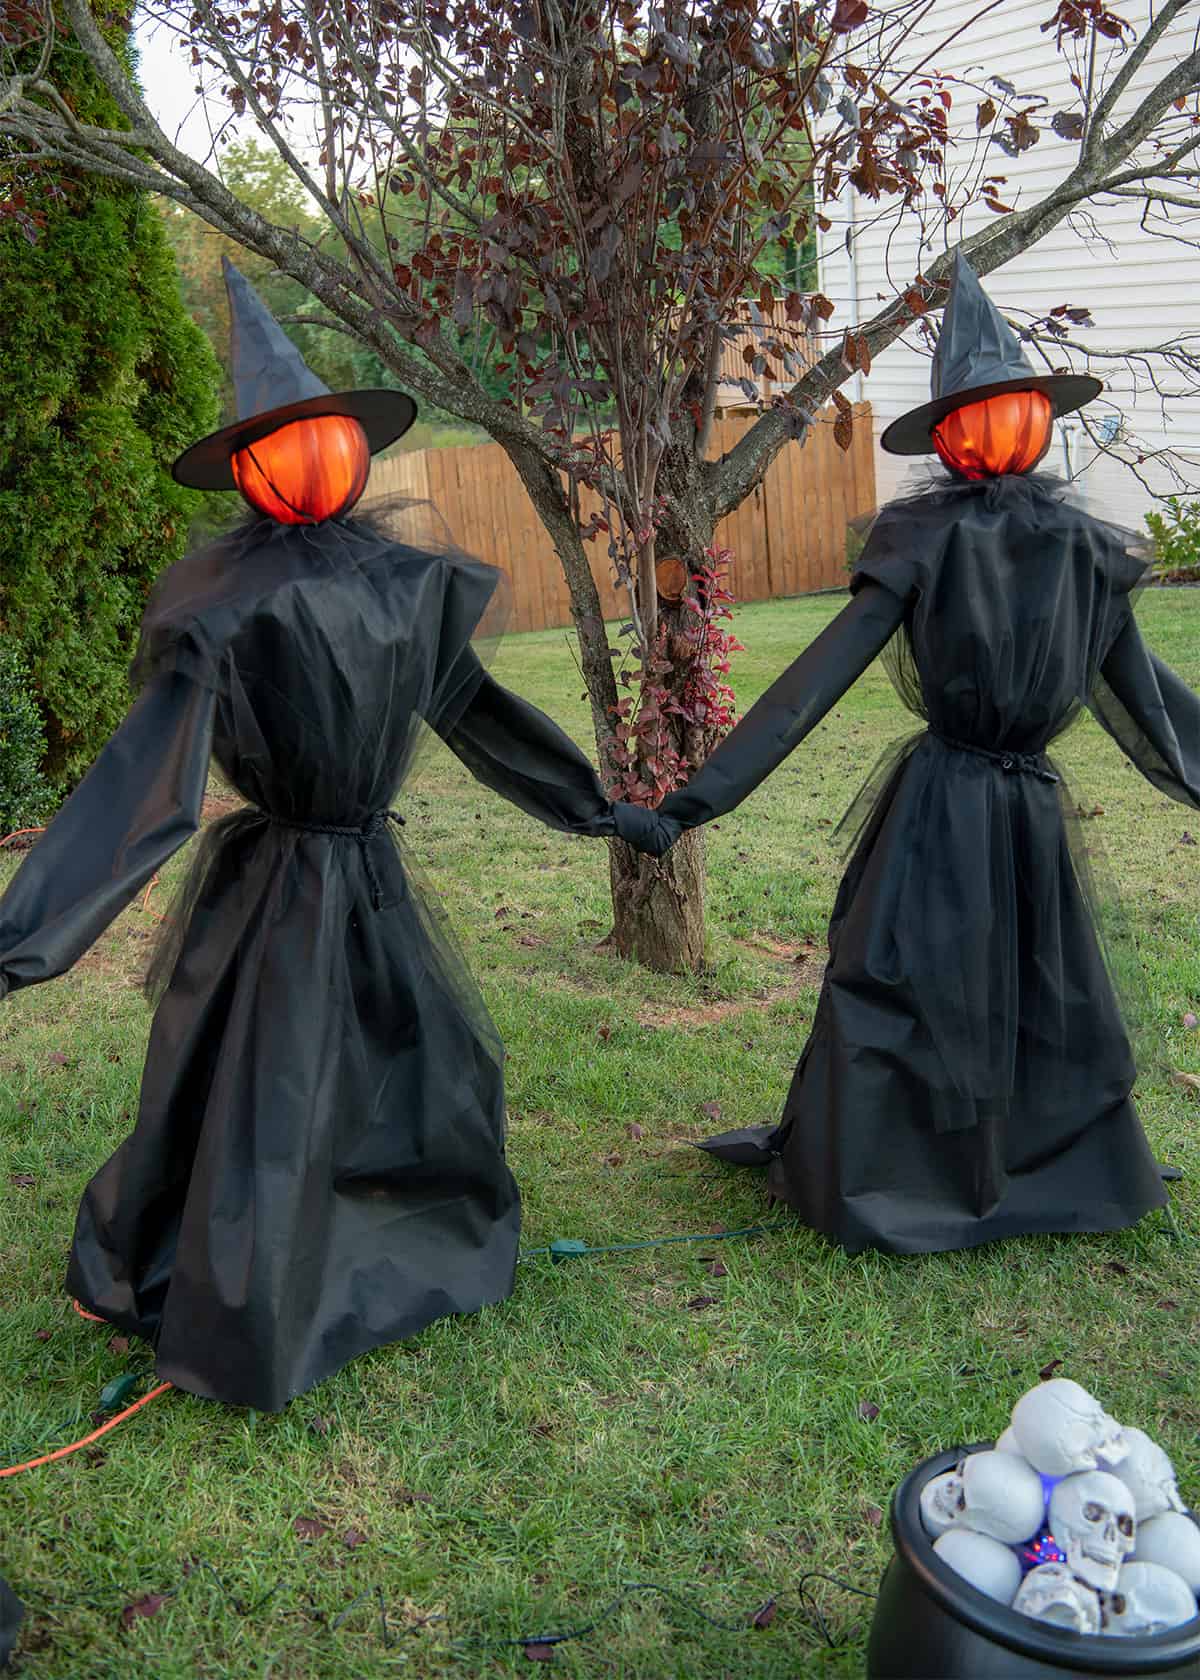 Two DIY witches with glowing heads standing near a cauldron filled with skulls.